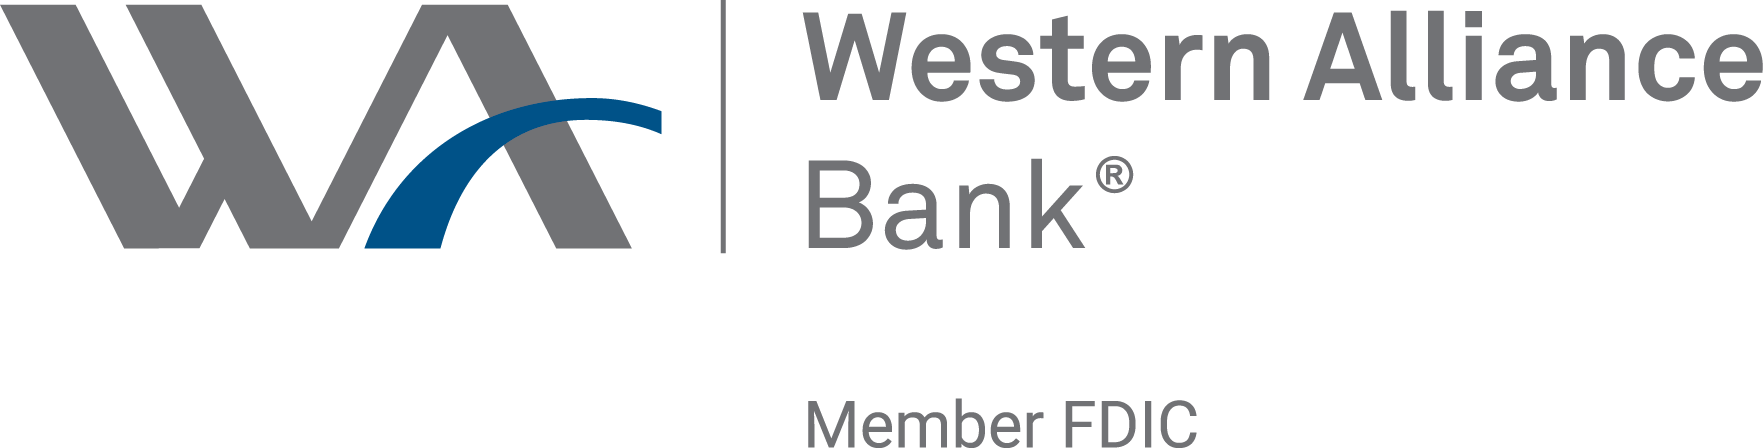 Western Alliance Bank Review